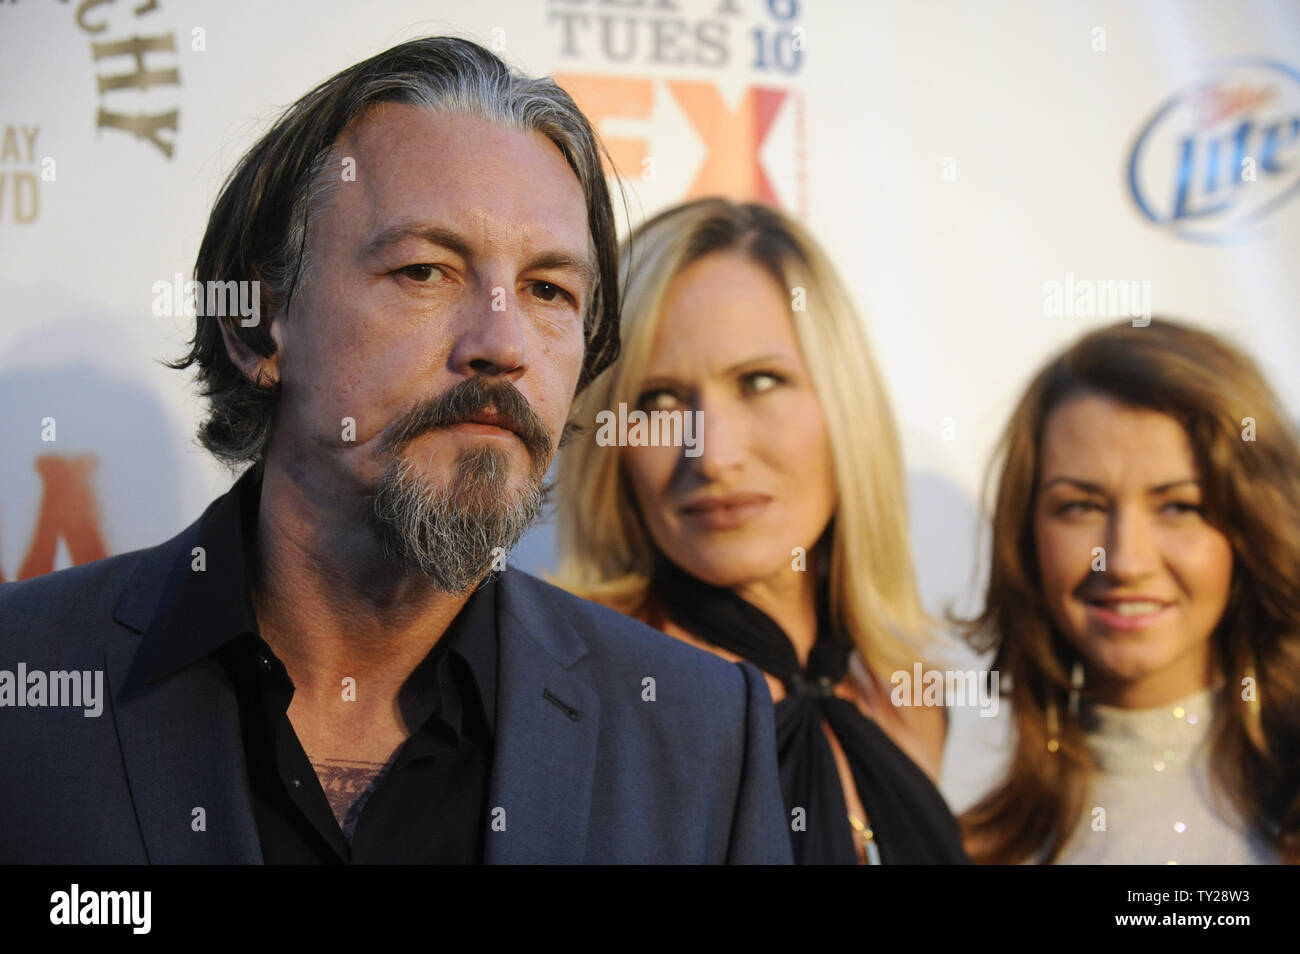 Cast member Tommy Flanagan attends the Sons of Anarchy, Season 4 premiere screening at the Arclight Theatre in the Hollywood section of Los Angeles on August 30, 2011.      UPI/Phil McCarten Stock Photo